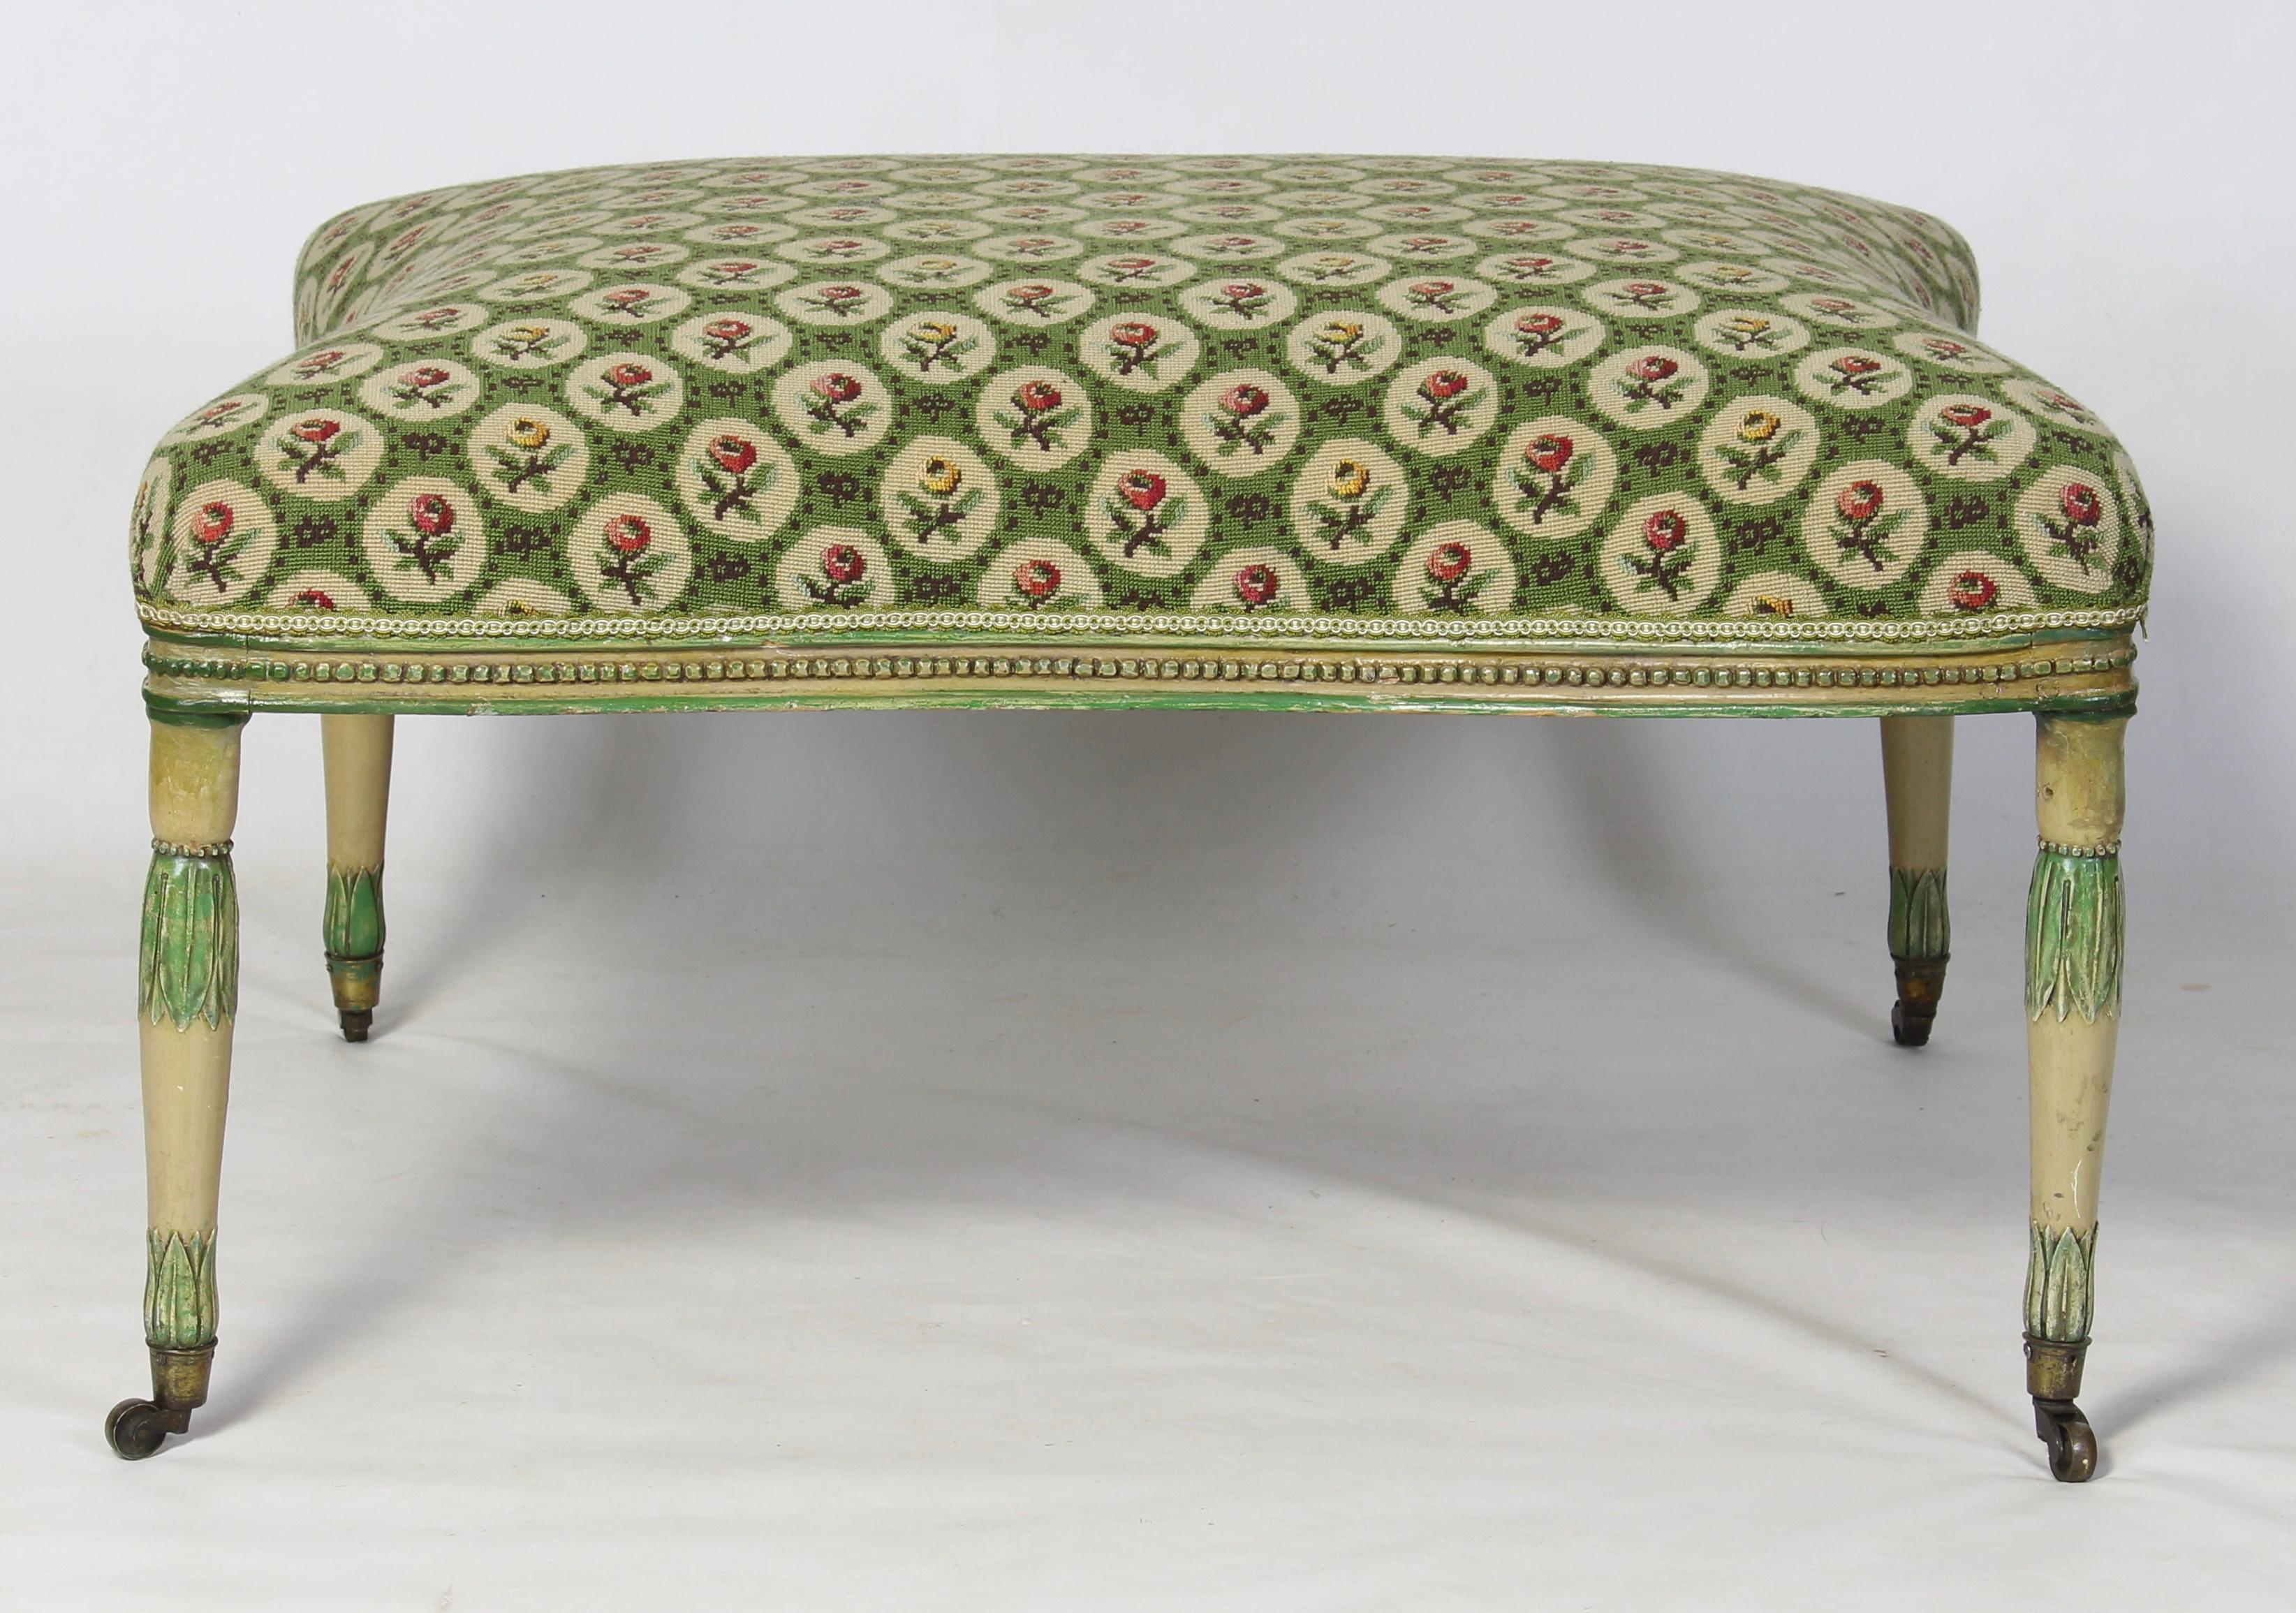 A large late 18th century English George III carved wood and paint decorated footstool or ottoman upholstered in green floral tapestry above four fluted tapering legs terminating in brass cup casters.